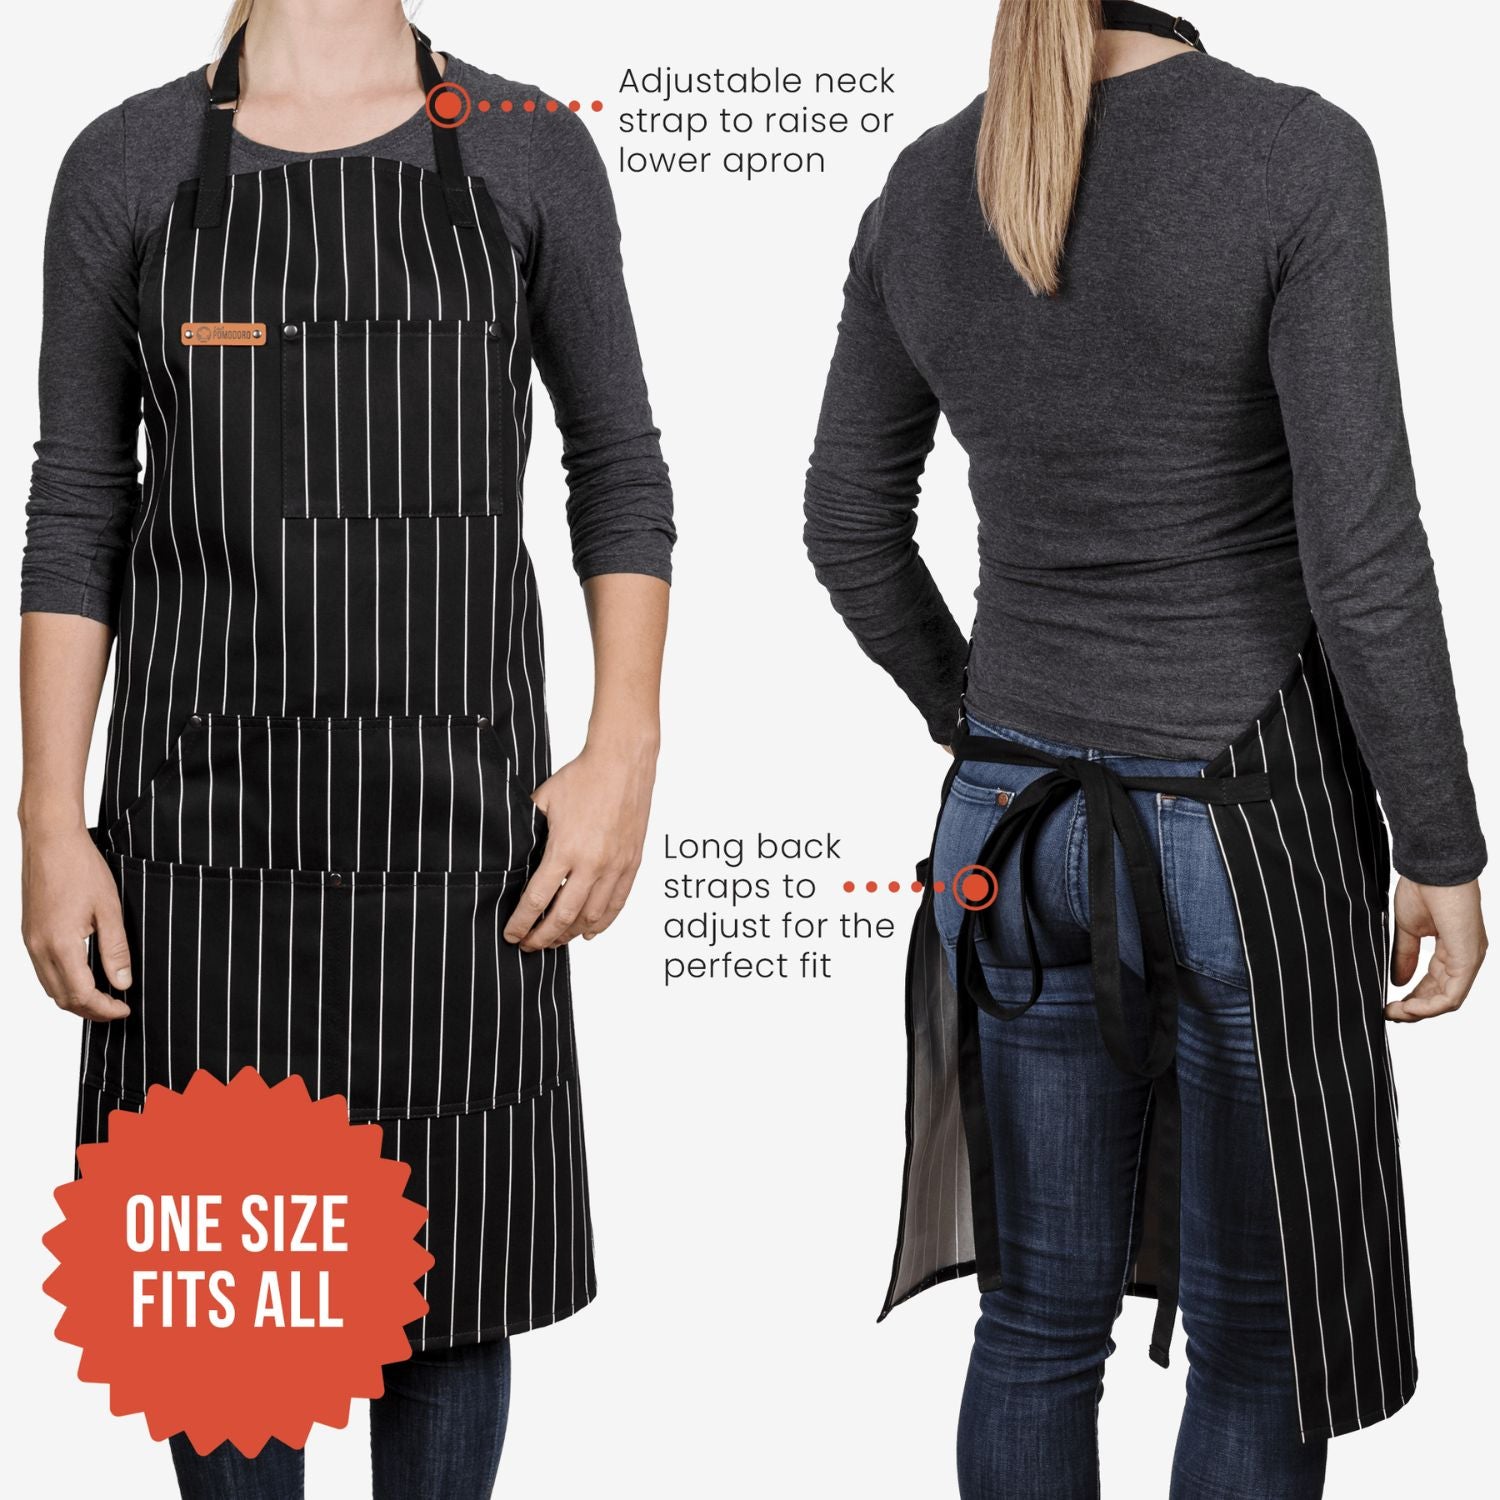 Kitchen apron with pockets and adjustable neck straps